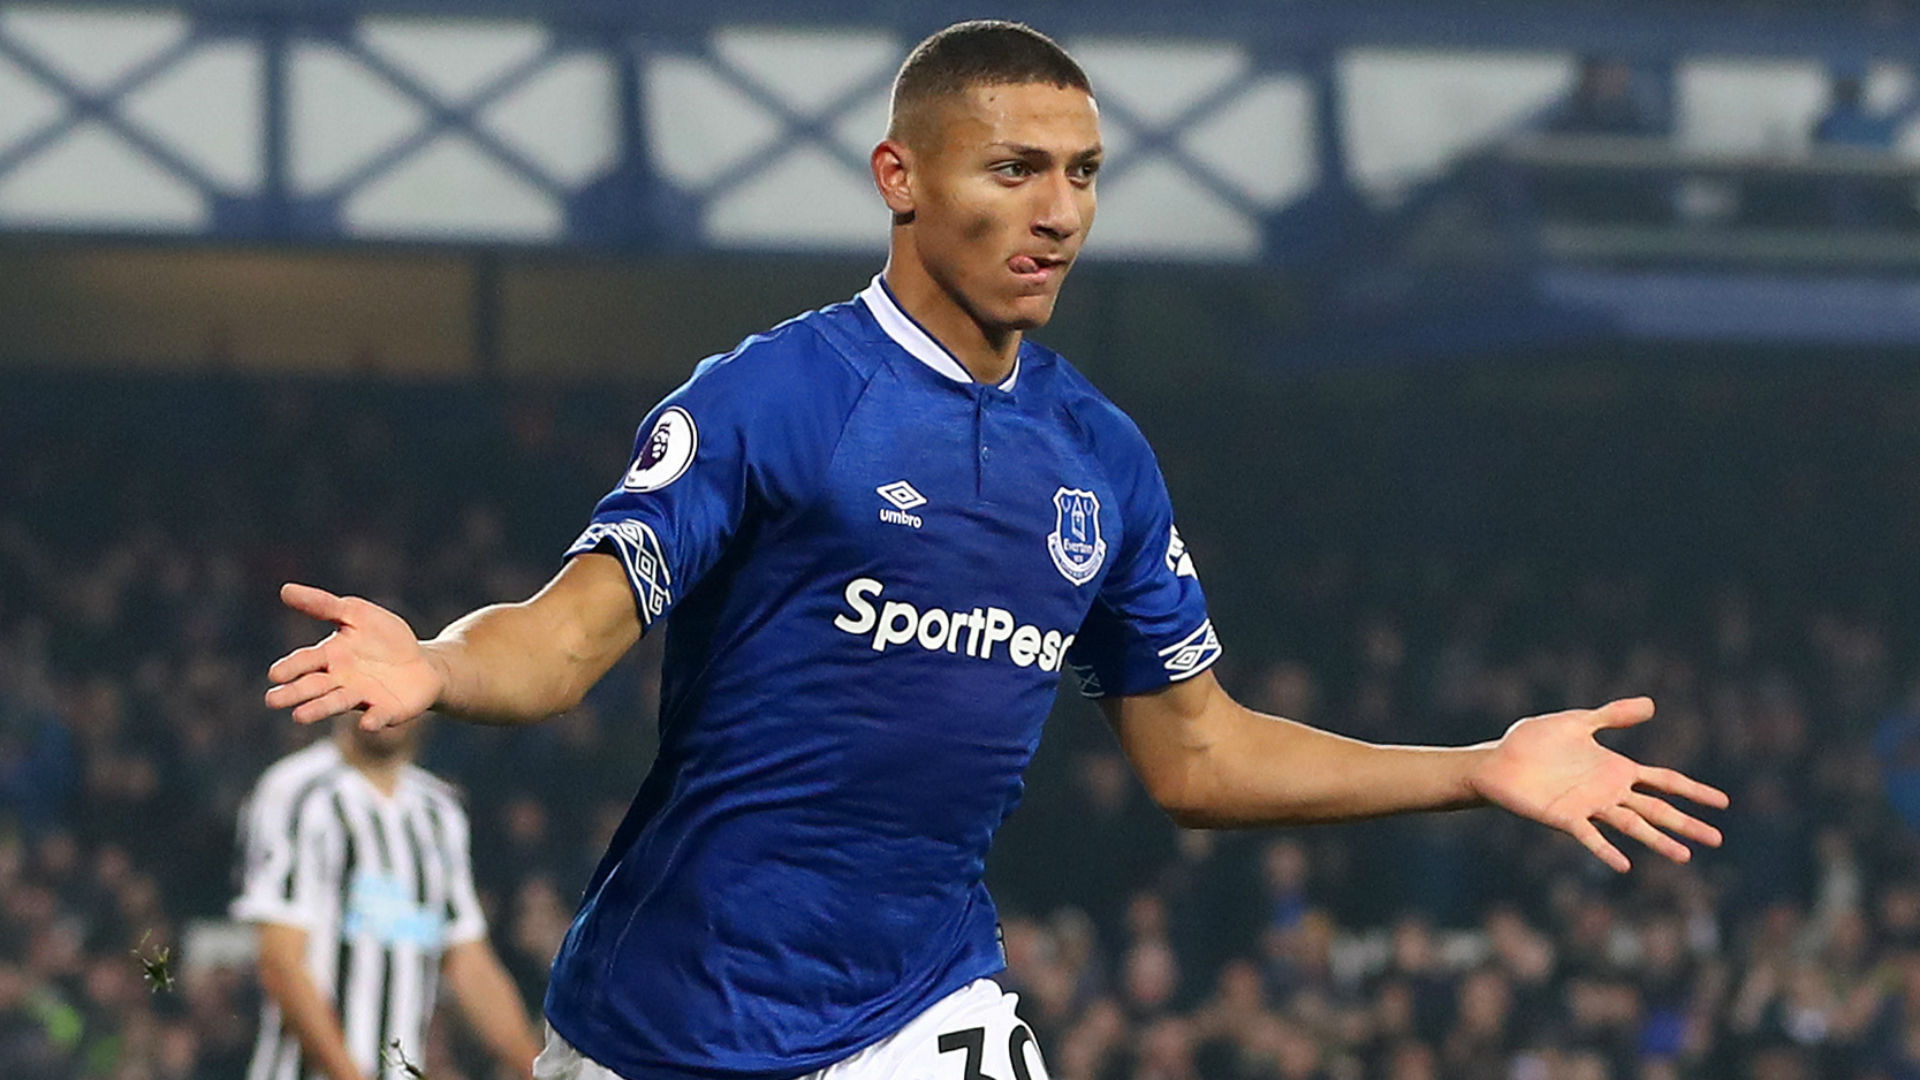 Richarlison will face former club Watford for the first time on Monday, and Troy Deeney quipped that he can expect a bruising.